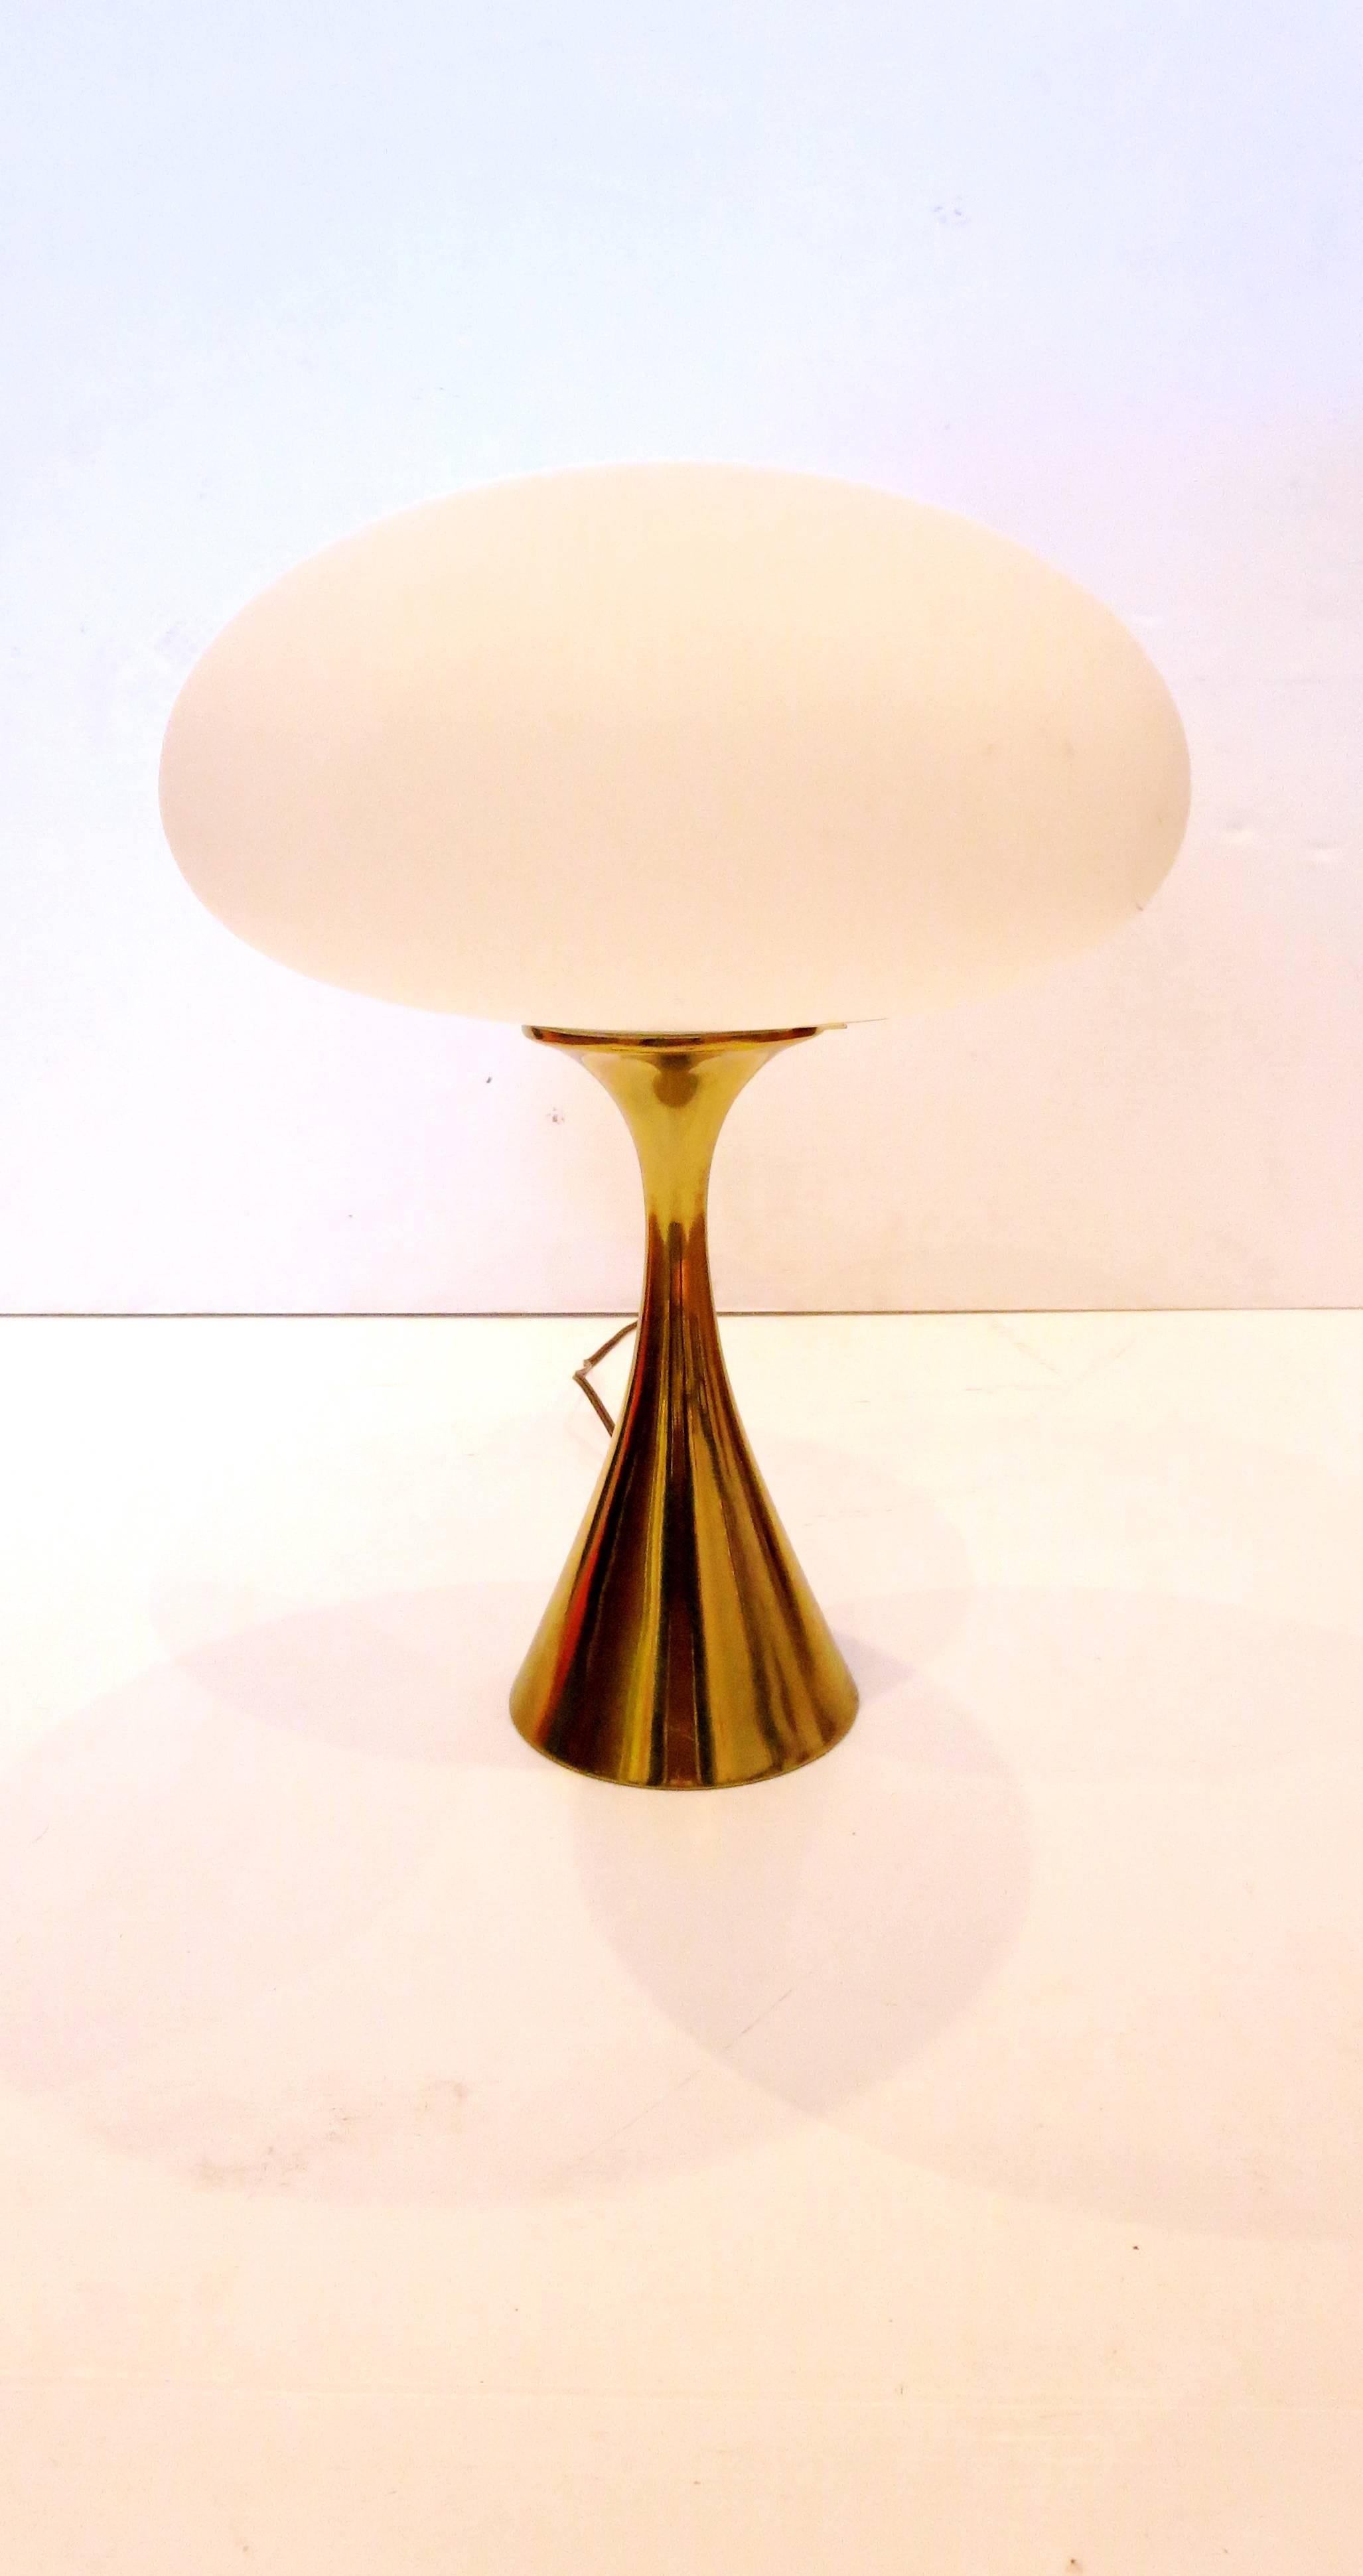 Nice elegant and hard to find pair of mushroom lamps by Laurel lighting, Italian mouth blown glass original shades, with polished brass bases great condition, hard to find a matching pair like these.